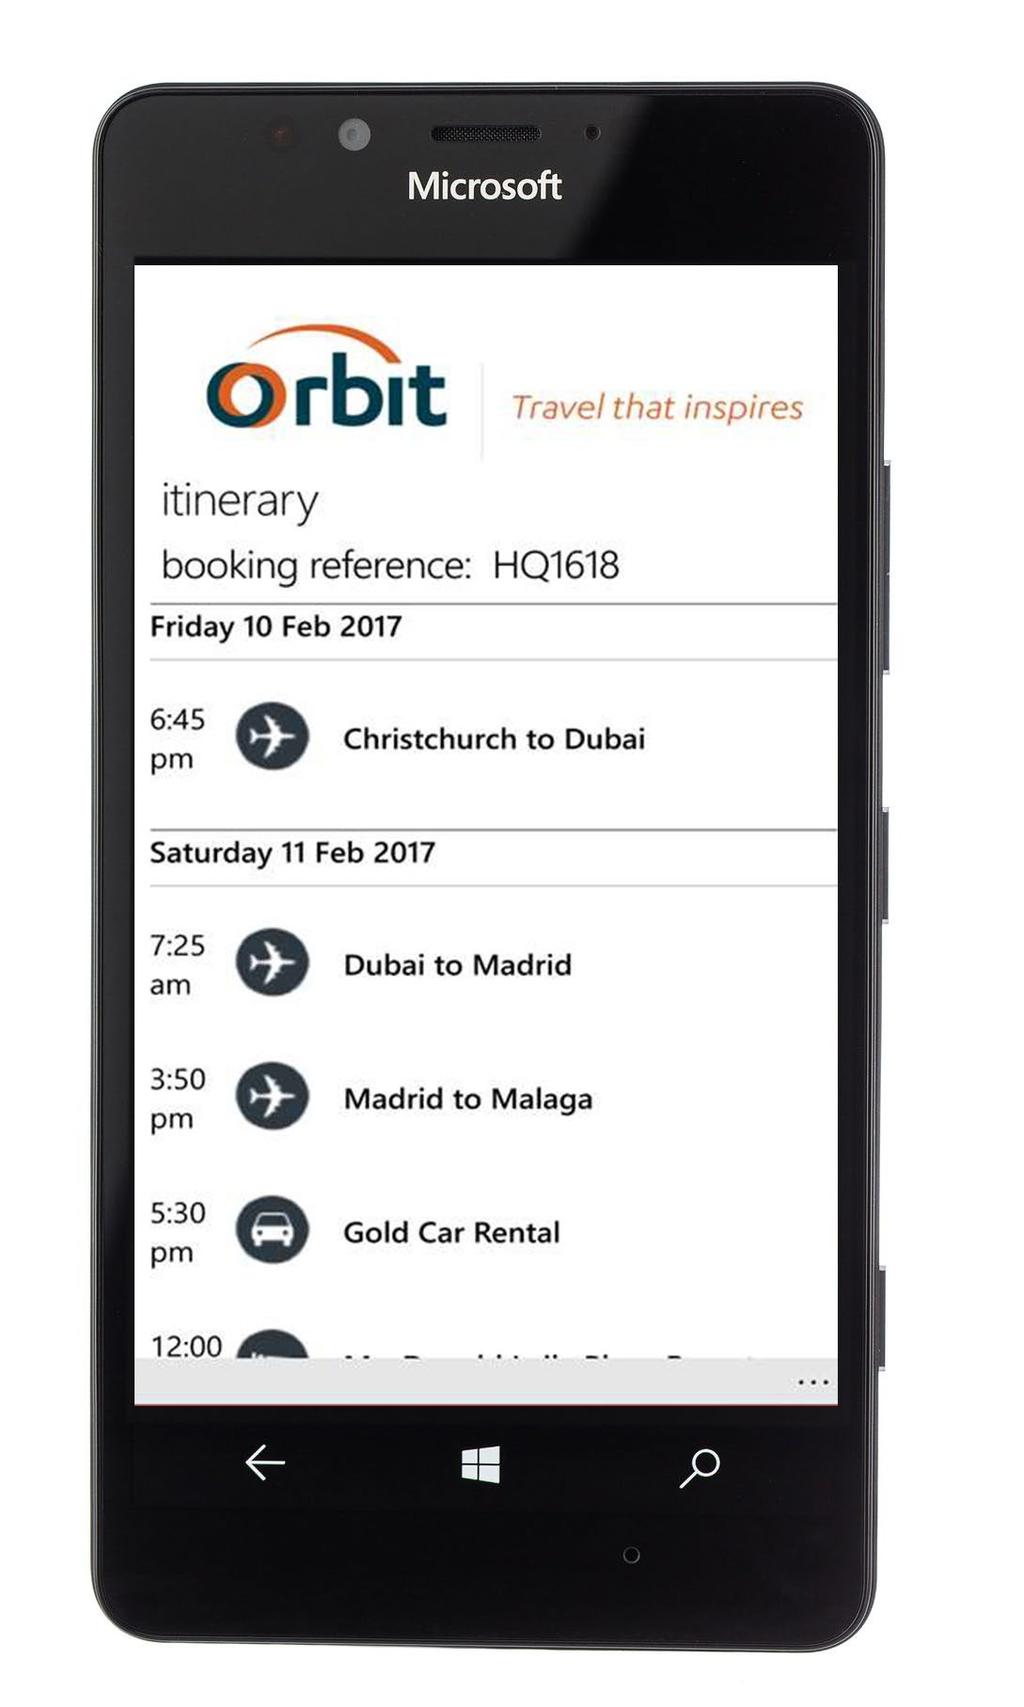 Windows Version The Windows version of the Orbit App has been designed and optimised for Windows 10 compatible mobile devices.